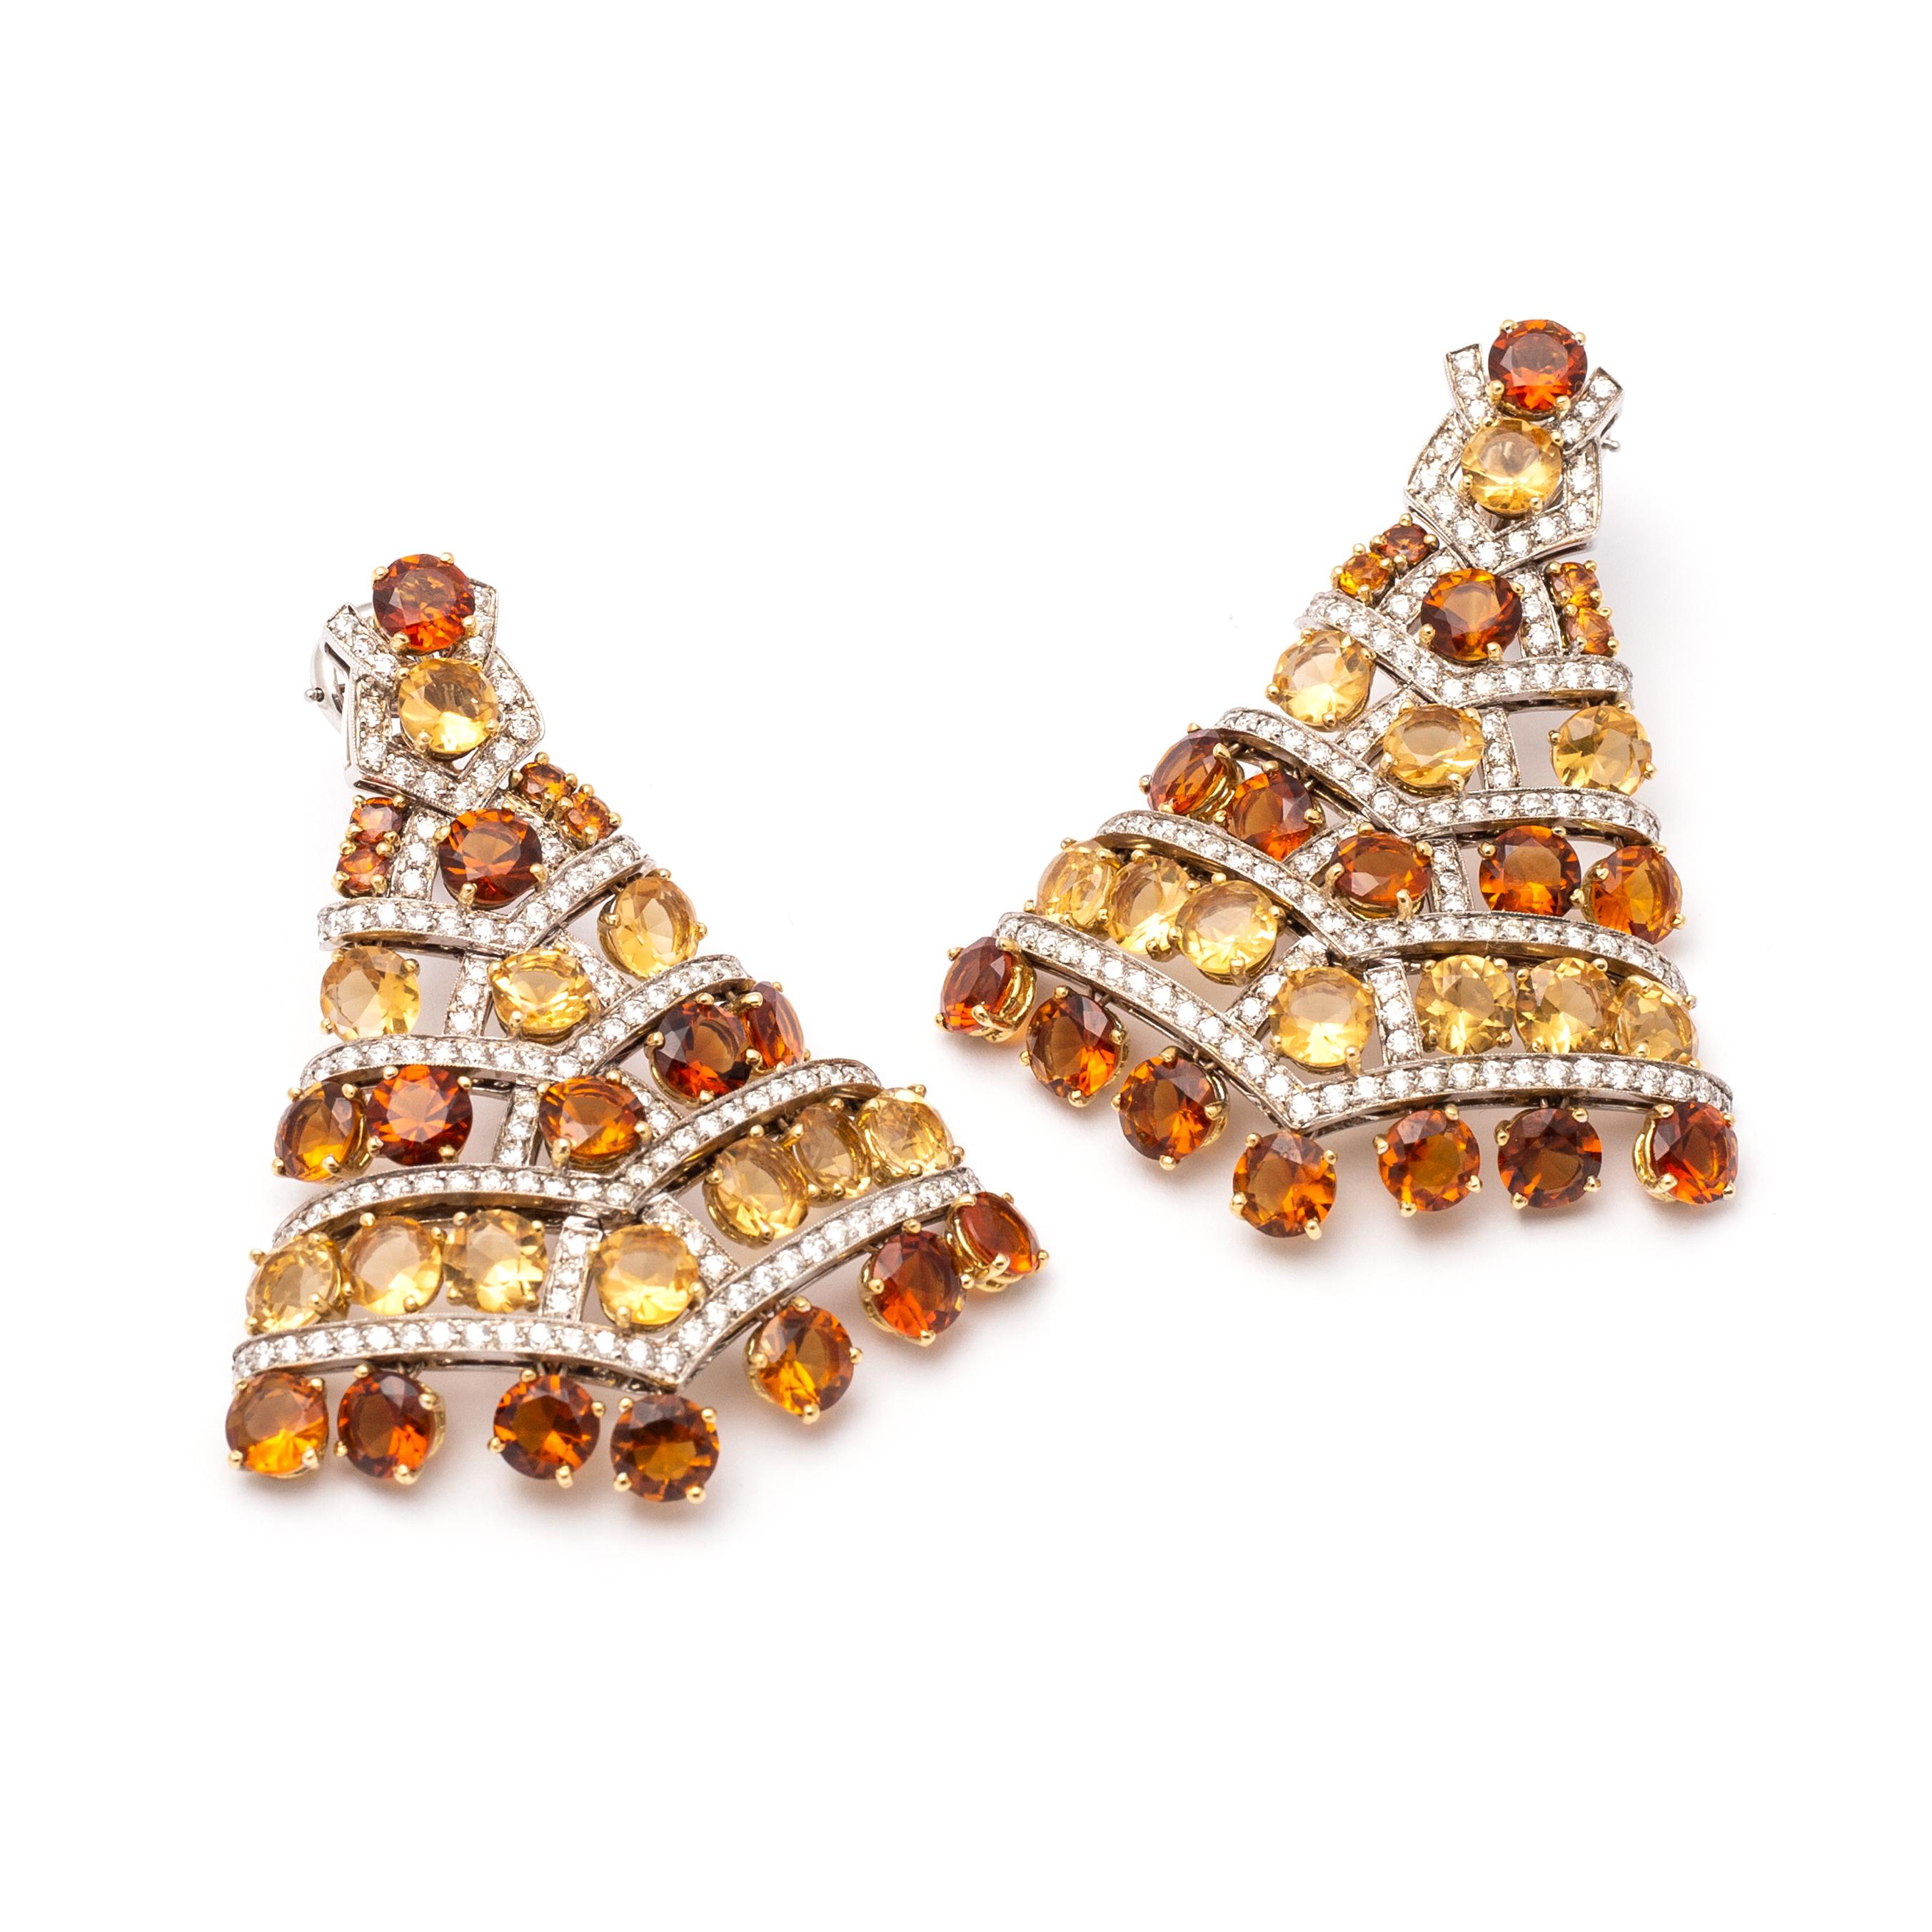 Pair of 18K two-color gold, citrine, quartz and diamond earlcips.
Michele della Valle.
The fan-shaped eaclips set with numerous round citrines and quartzes, accented by round diamonds weighing approximately 5.15 carats.
Signed MdV.